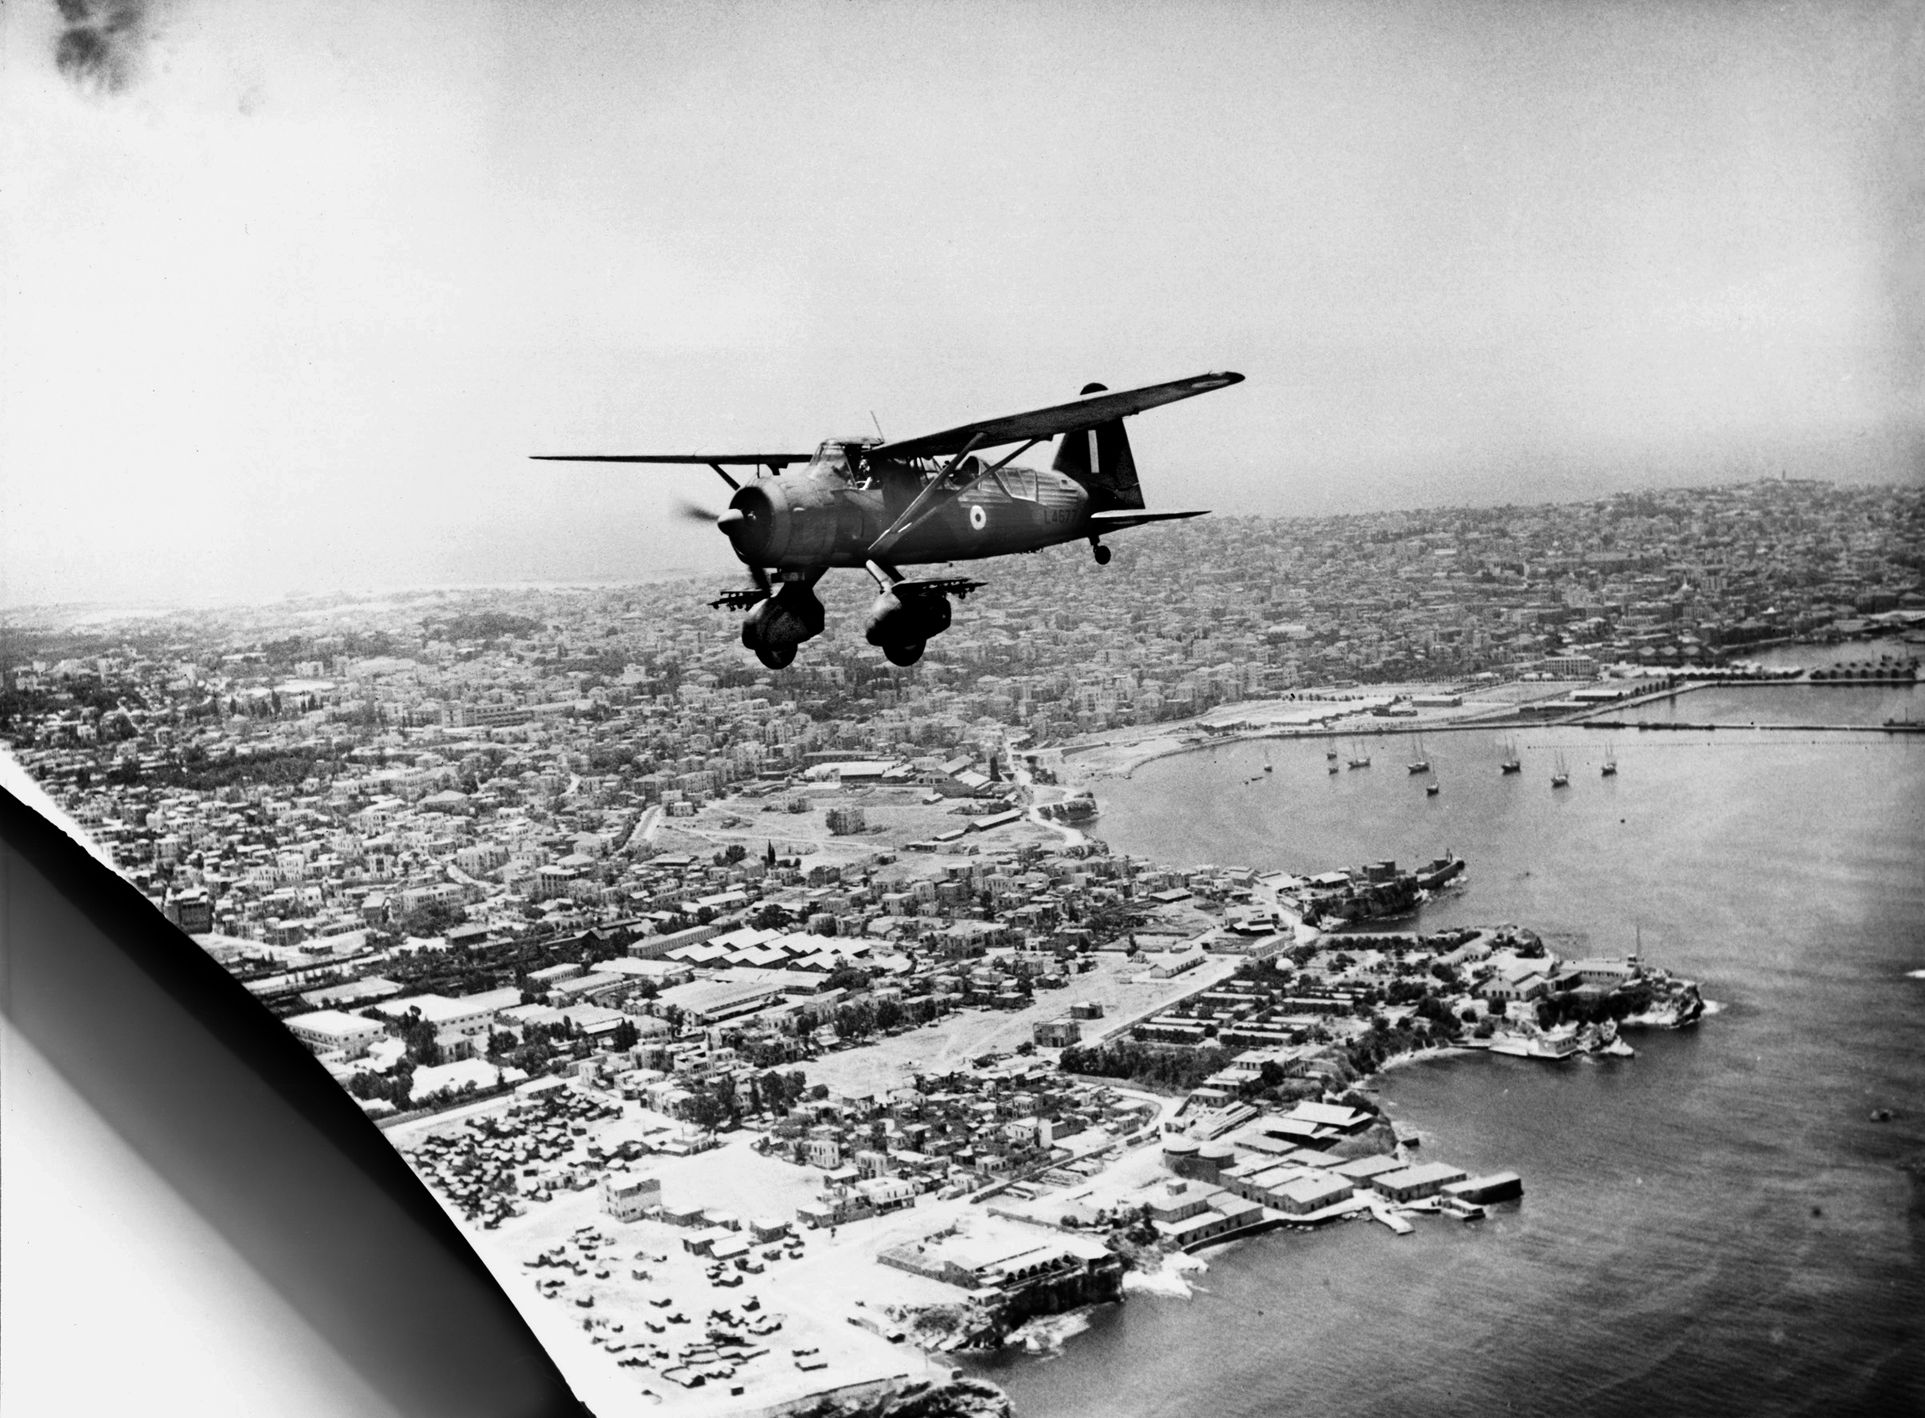 An RAF Westland Lysander Mark I flies over the Beirut waterfront shortly after the city fell to the British in July 1941.